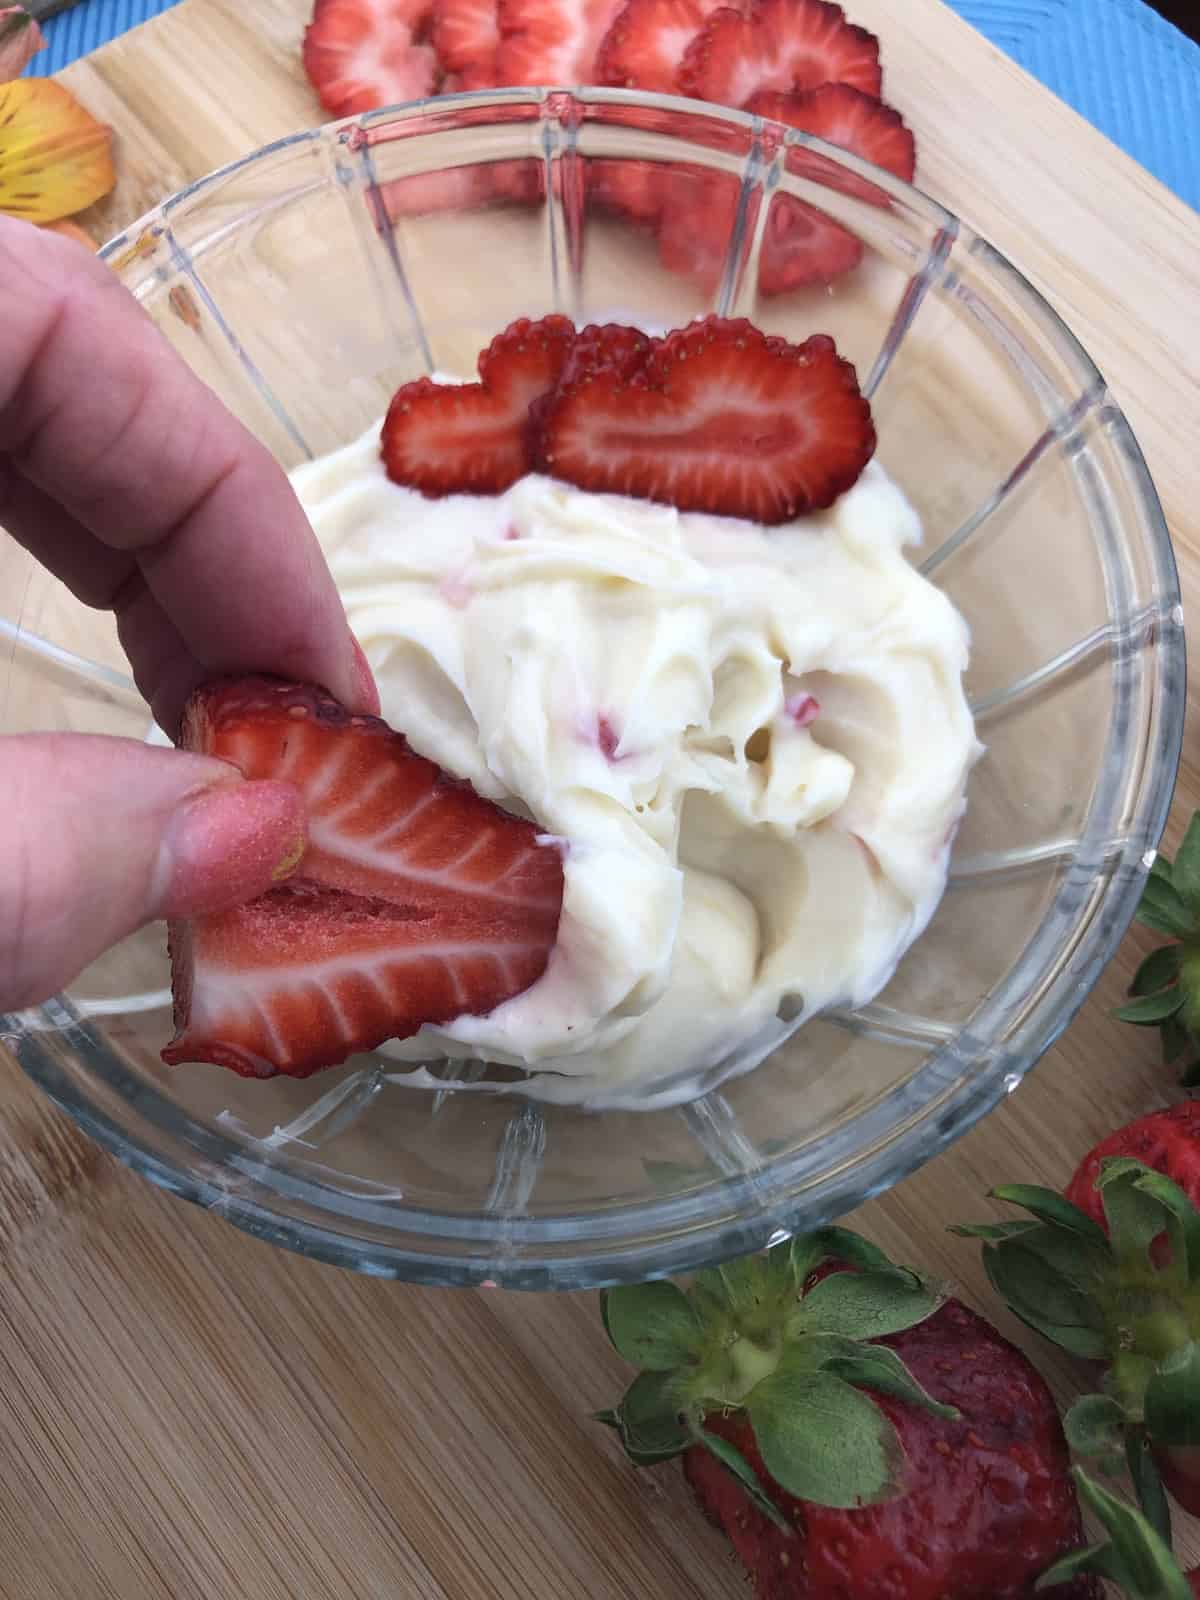 Dipping Strawberries in cream cheese dip from a glass bowl sitting on a wooden cutting board